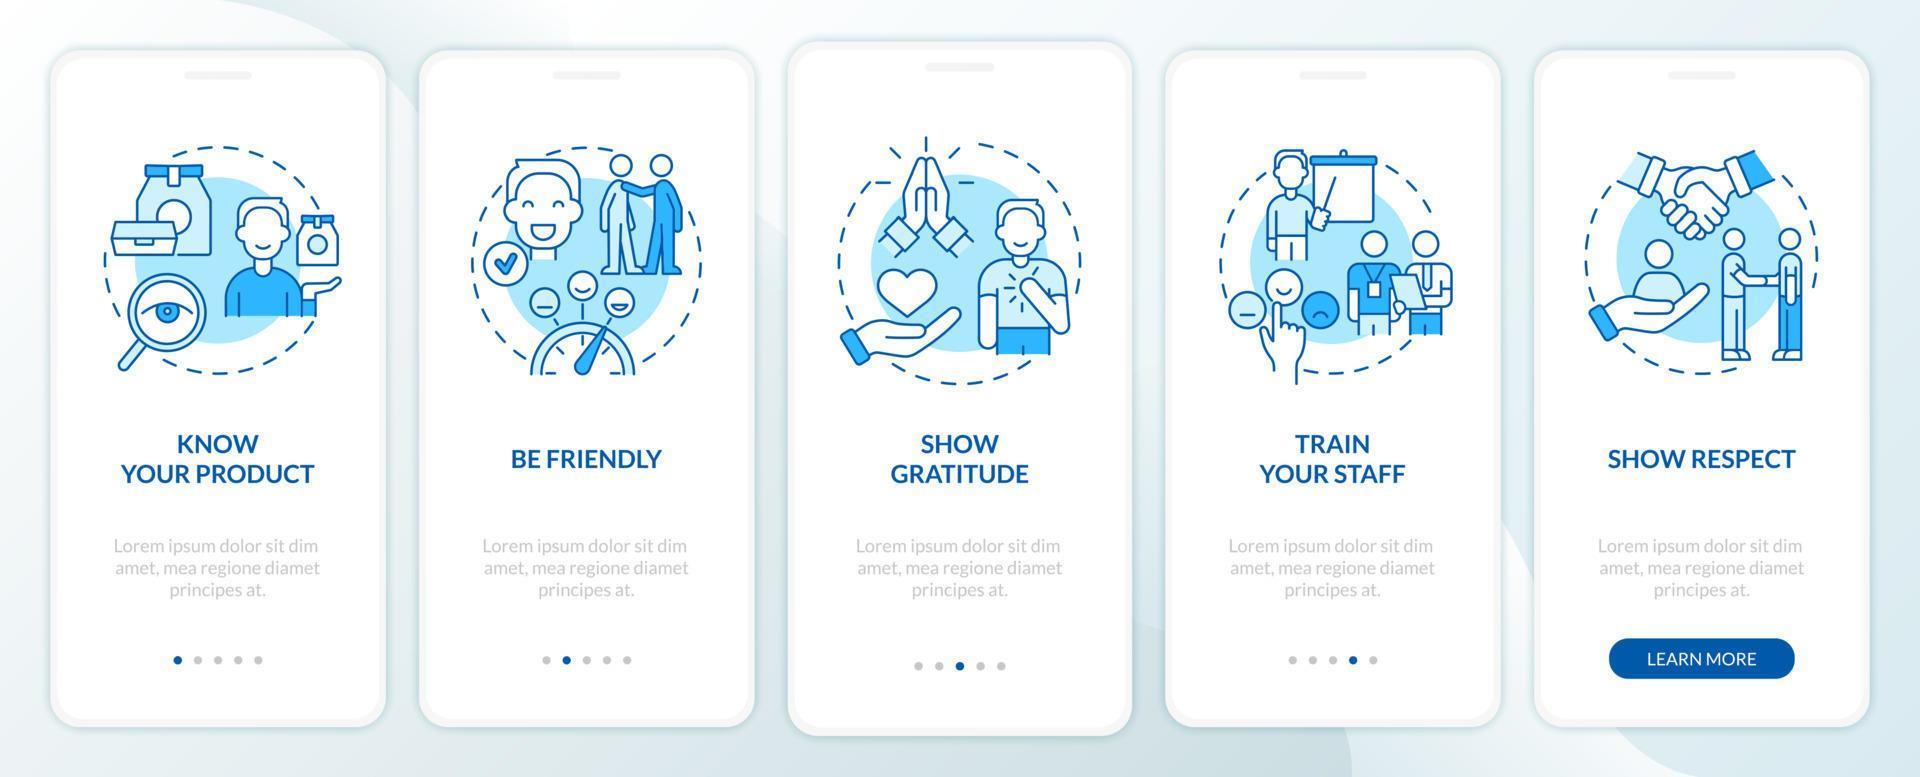 Customer service blue onboarding mobile app screen. Clients assistance walkthrough 5 steps graphic instructions pages with linear concepts. UI, UX, GUI template vector